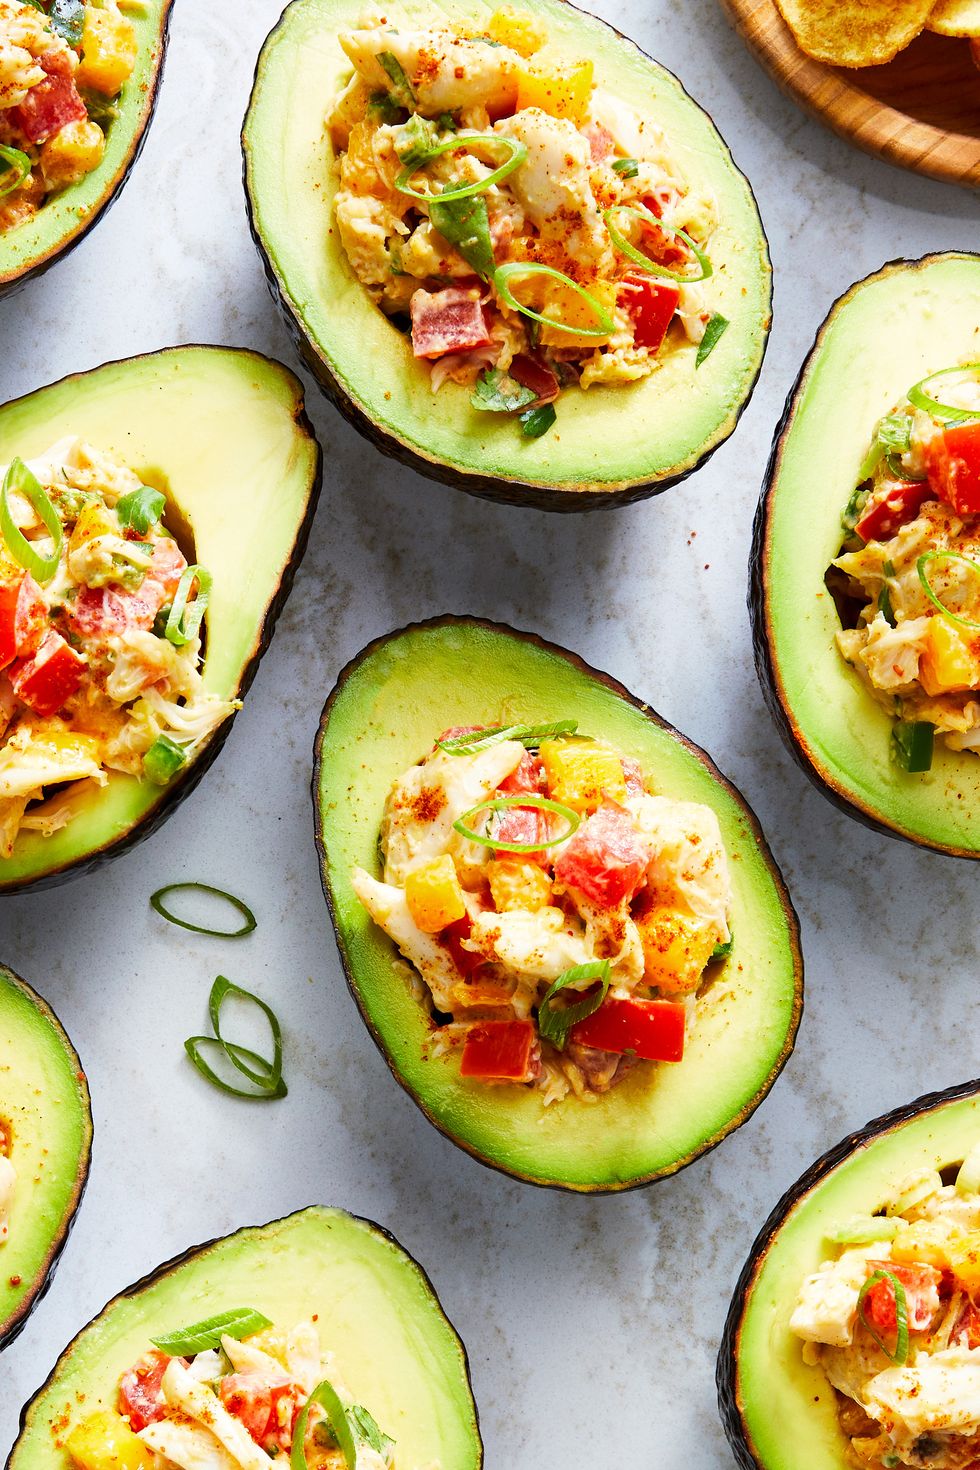 https://hips.hearstapps.com/hmg-prod/images/delish-230509-avocado-crab-boats-350-rv-lead-646bc7a1d5ab3.jpg?crop=0.6668742216687422xw:1xh;center,top&resize=980:*